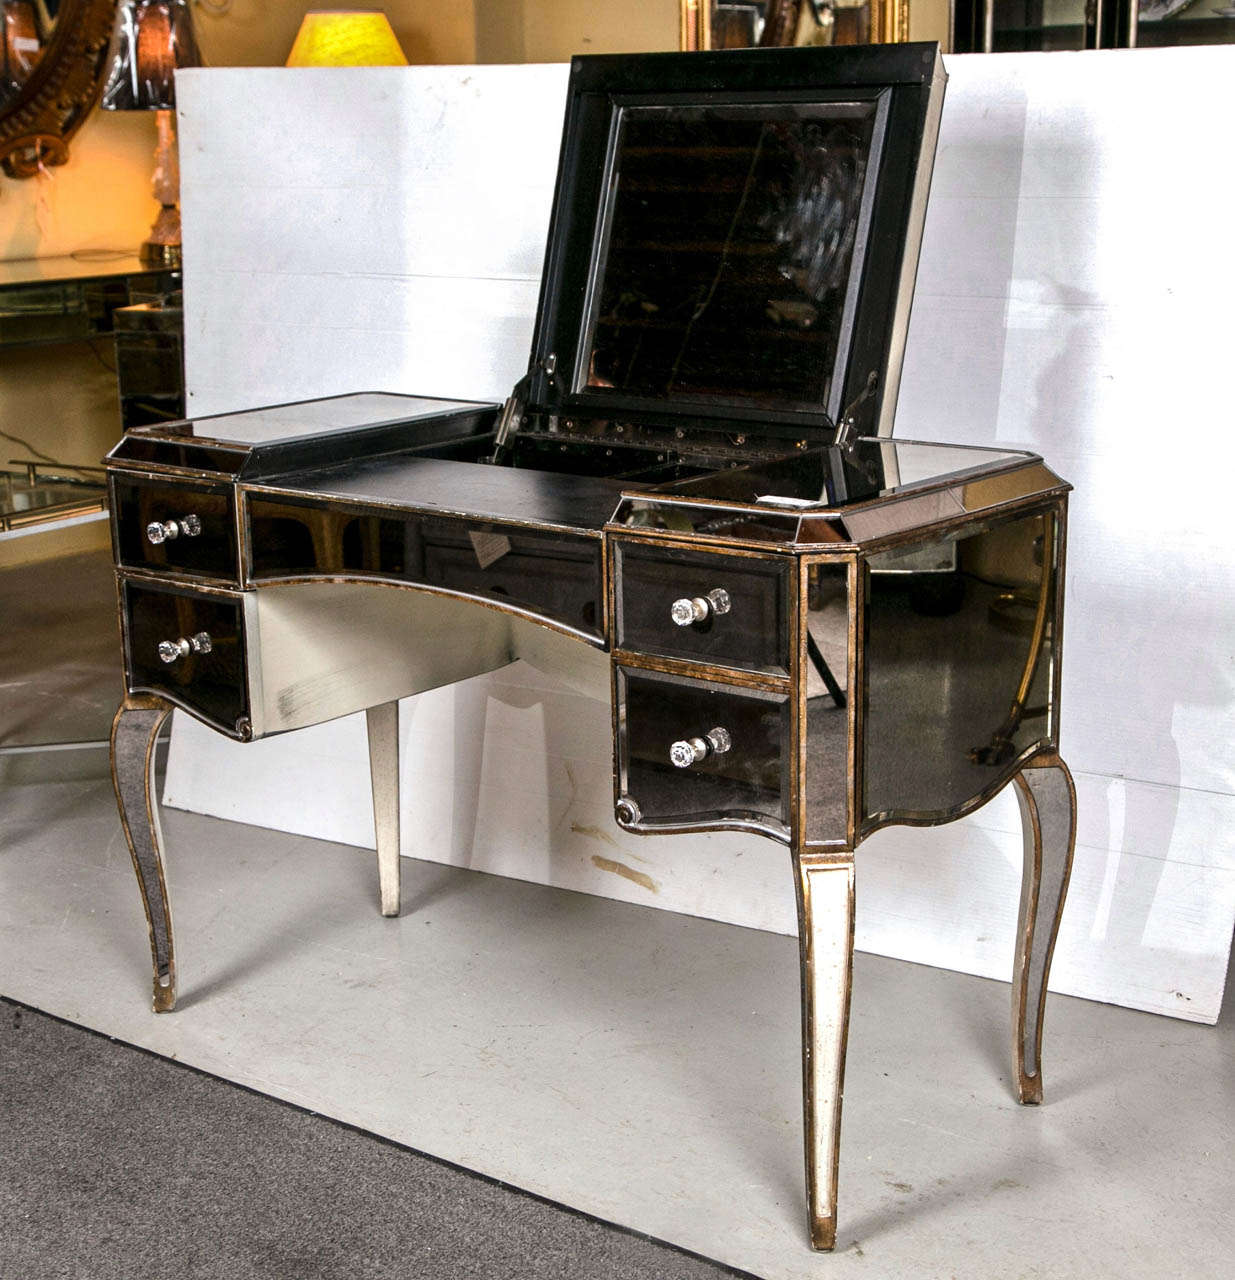 A fine mirrored curved gilt legged five draw vanity accentuated with crystal knobs. The sweeping mirrored legs finely framed in a wooden gilt gold design. The centre flip-top drawer having hide away interior compartment, flanked by a group of four